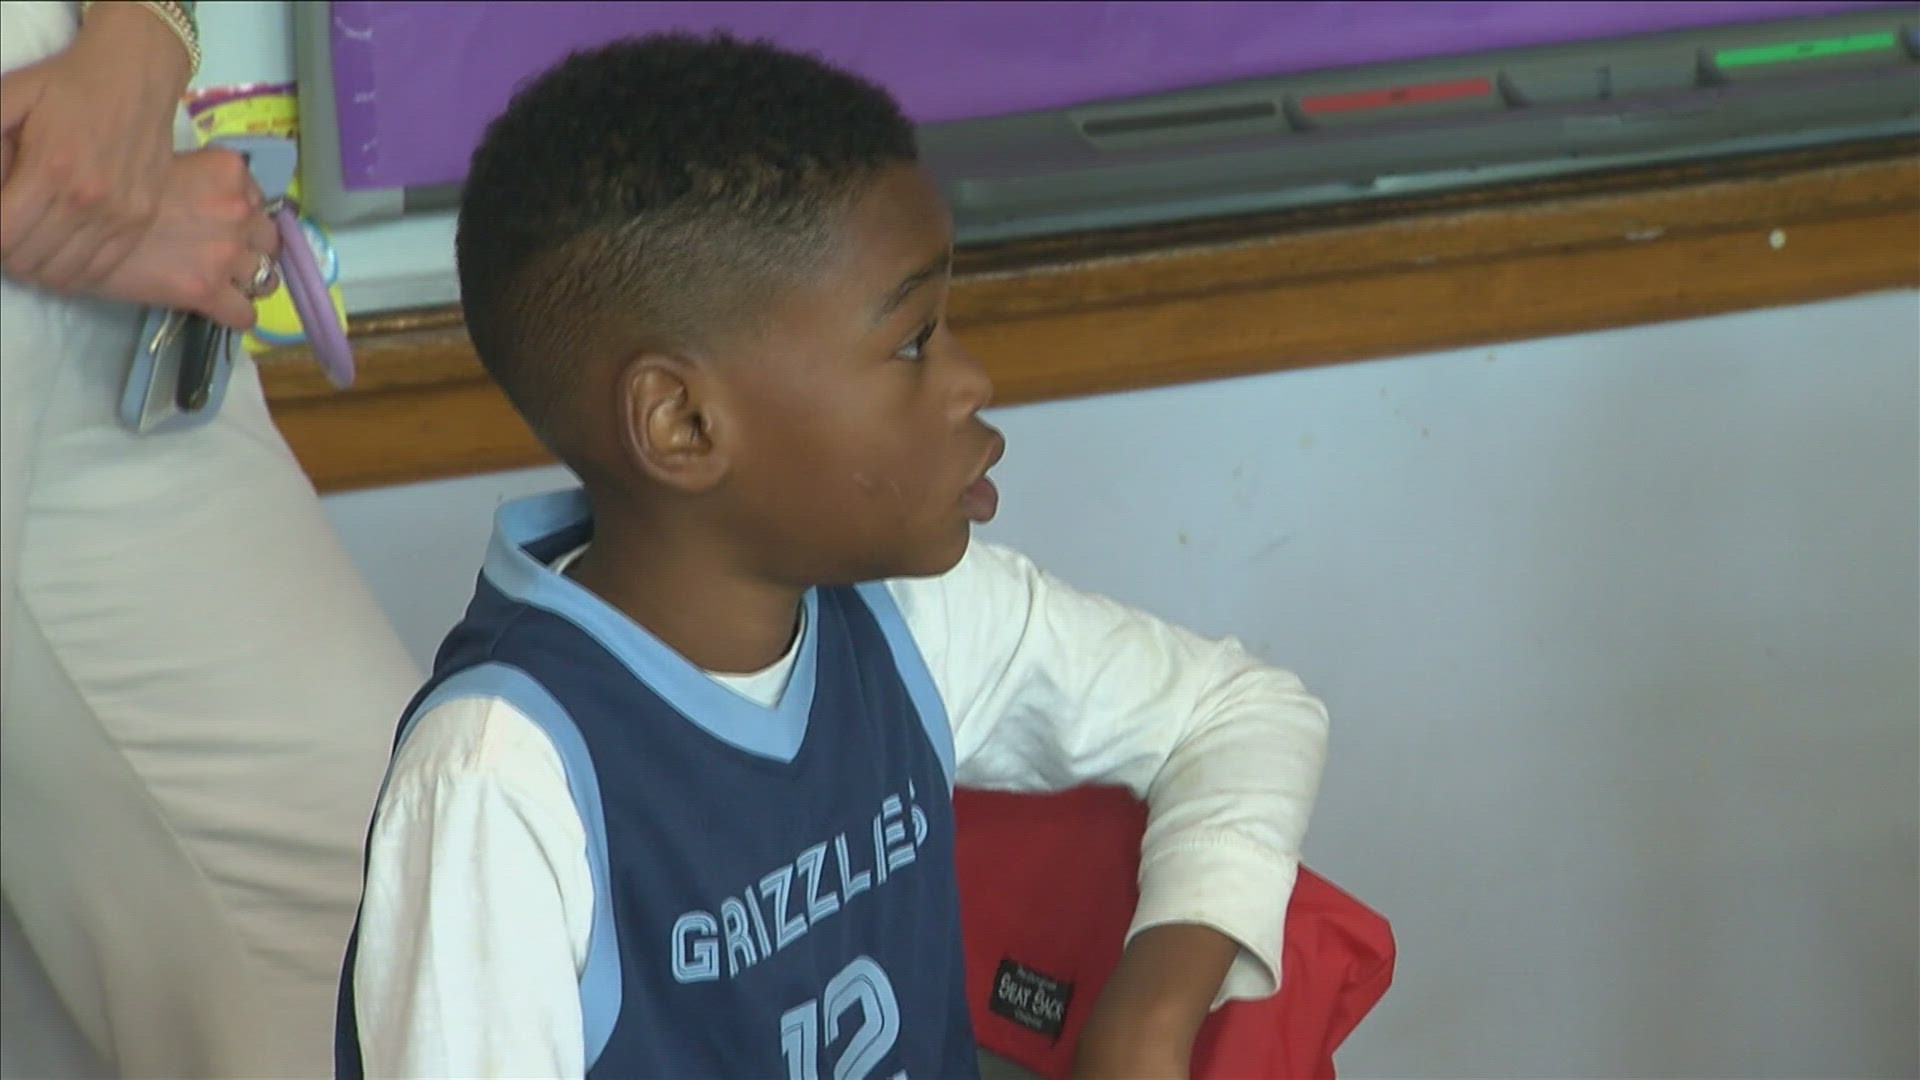 Volunteers with the Memphis grizzlies visited Treadwell Elementary, and Morant and Nike surprised young athletes with gear.